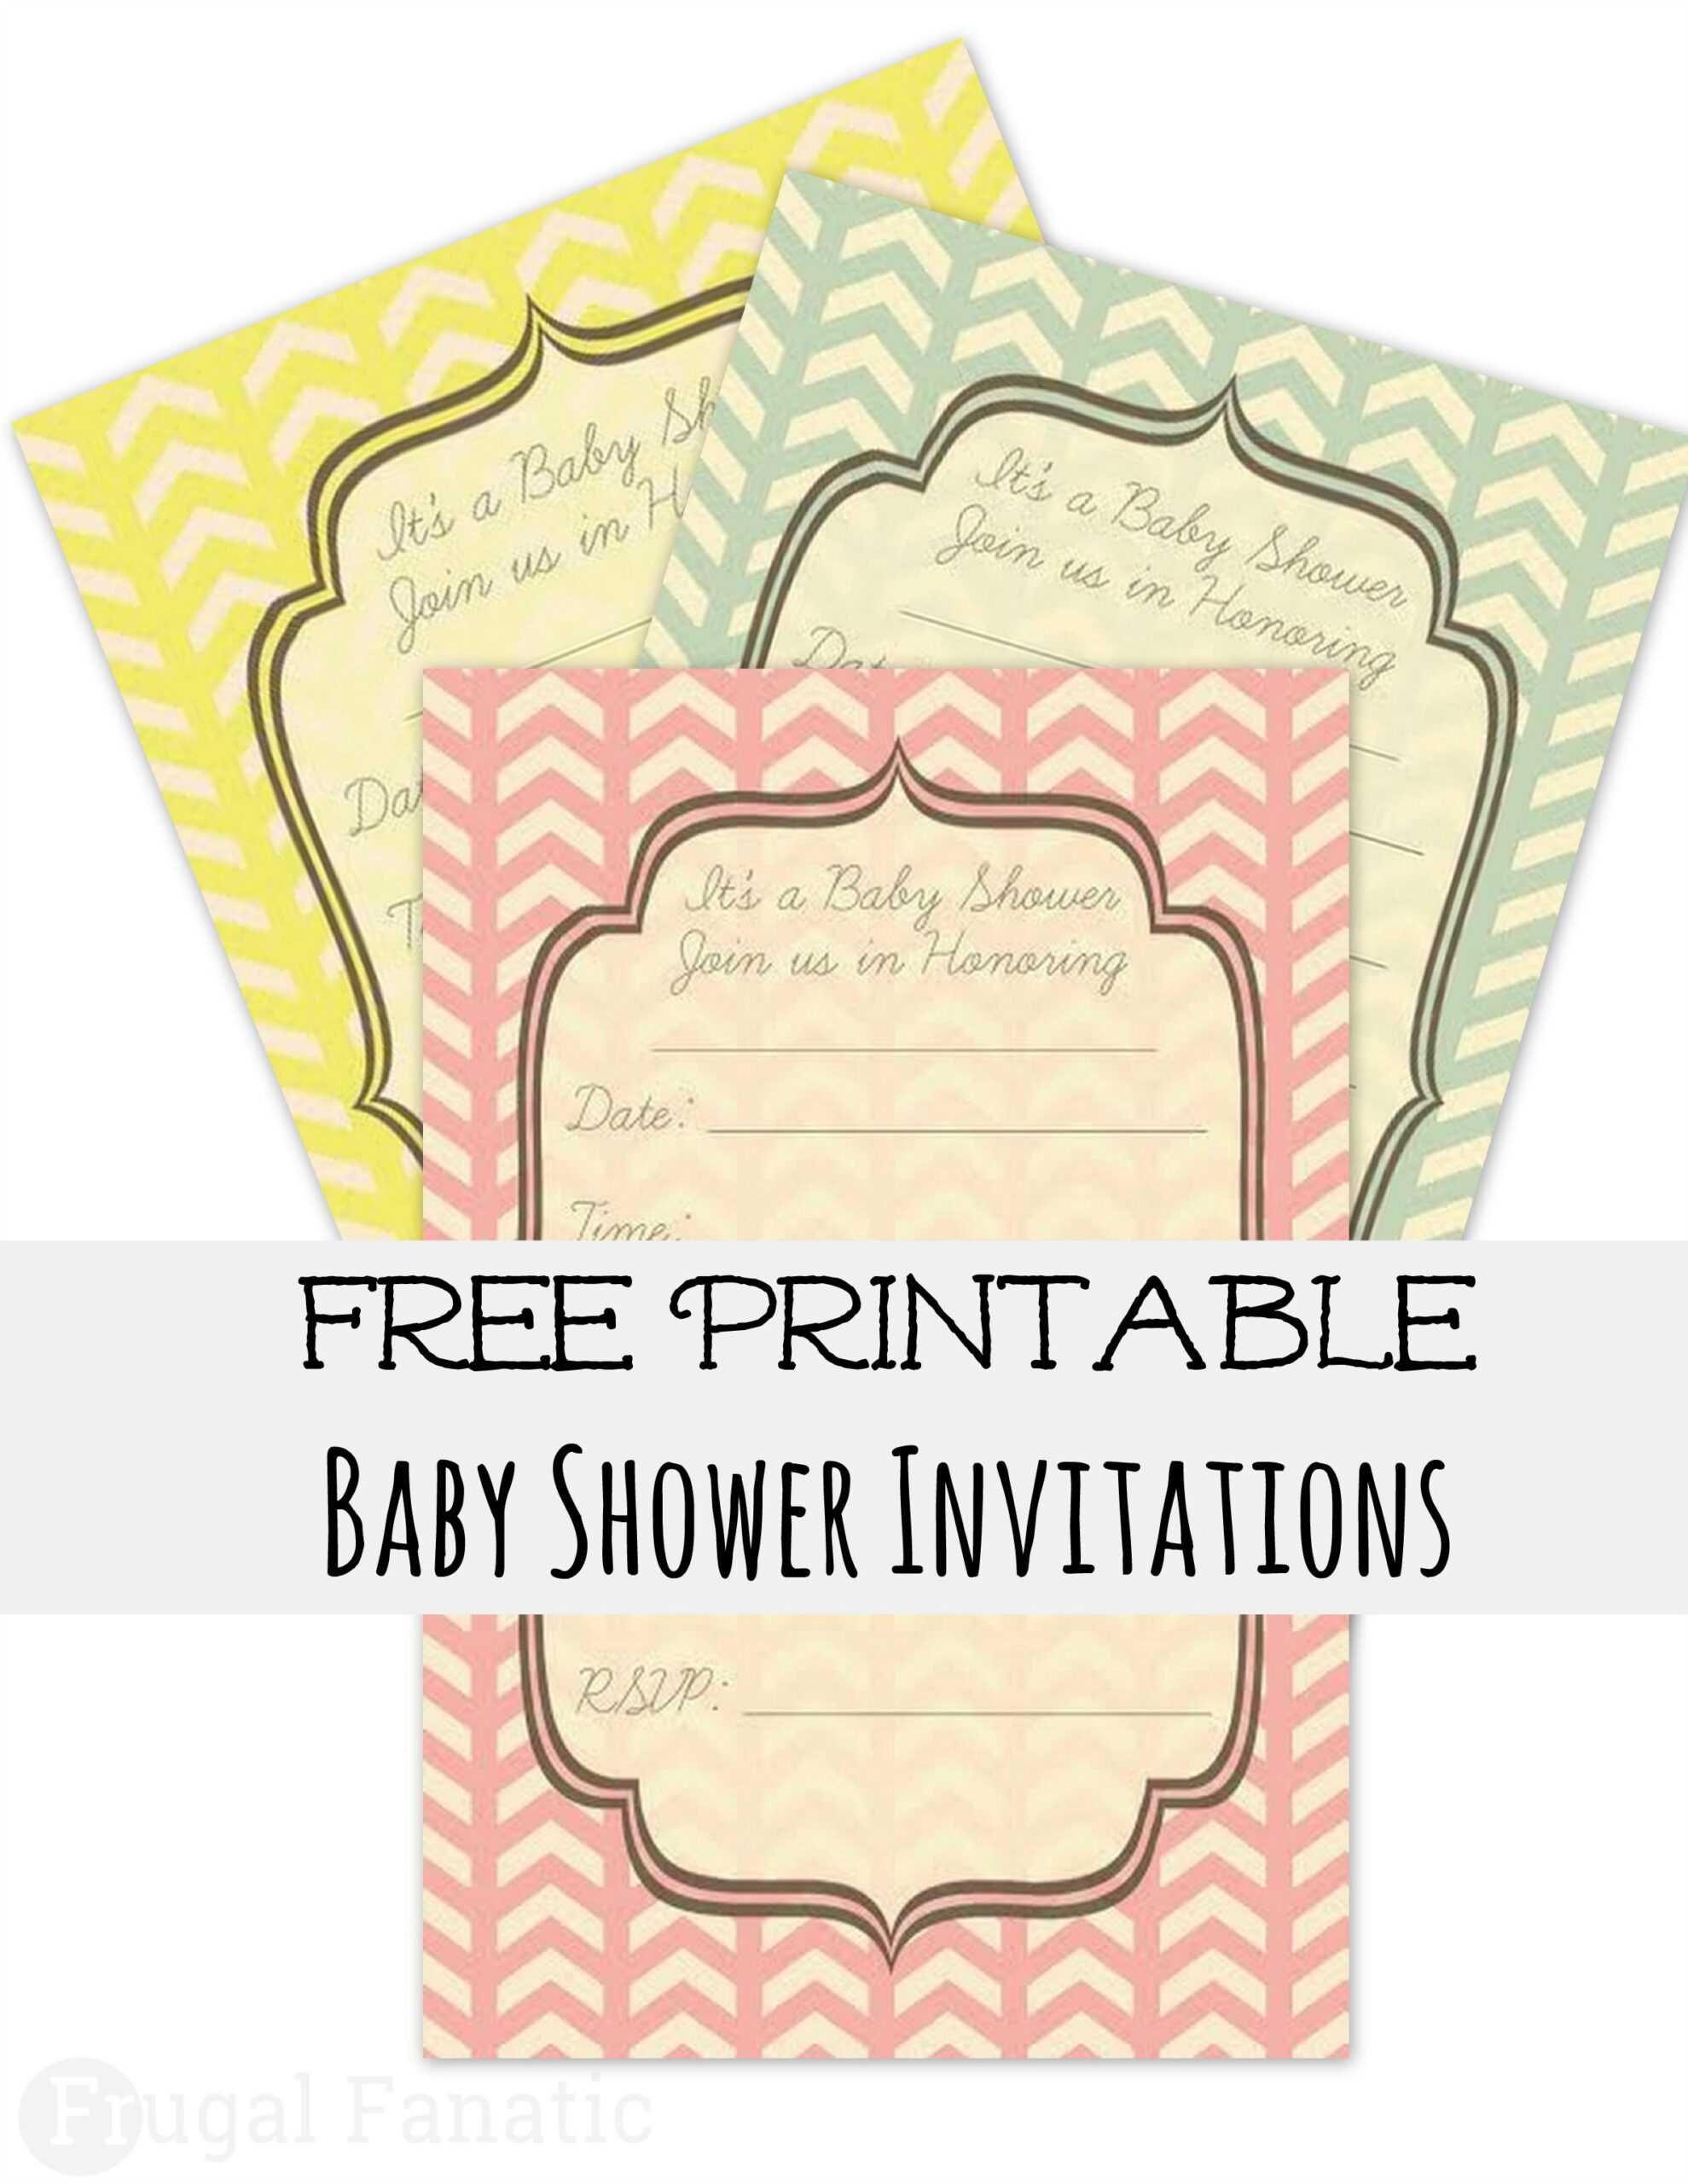 Top Baby Shower Invitation Templates You Must See Theruntime With Regard To Free Baby Shower Invitation Templates For Word